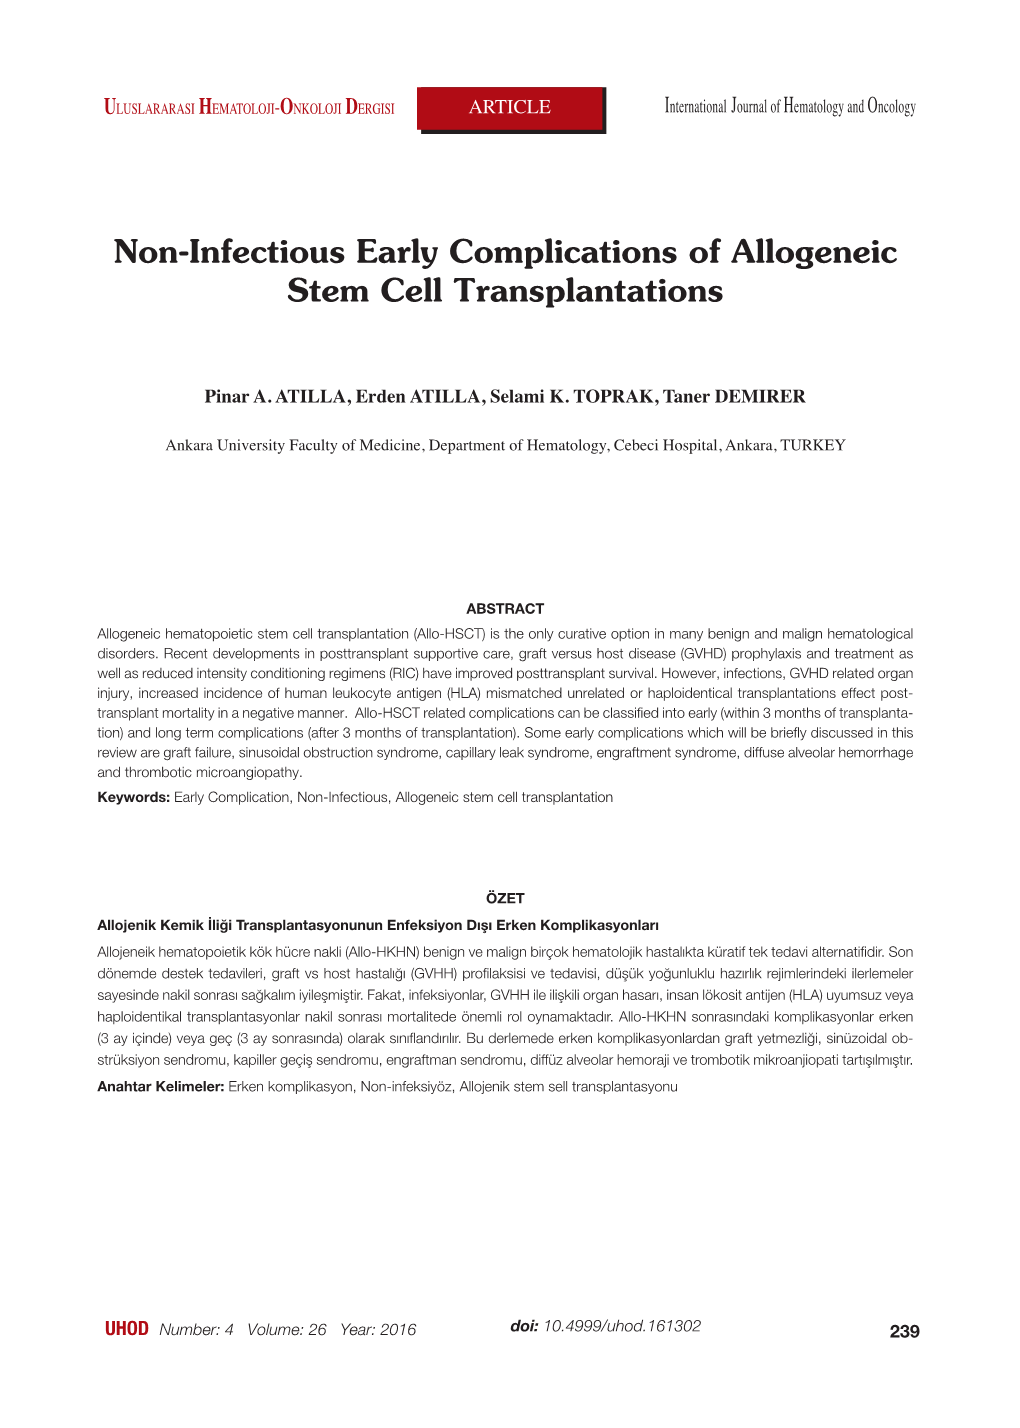 Non-Infectious Early Complications of Allogeneic Stem Cell Transplantations